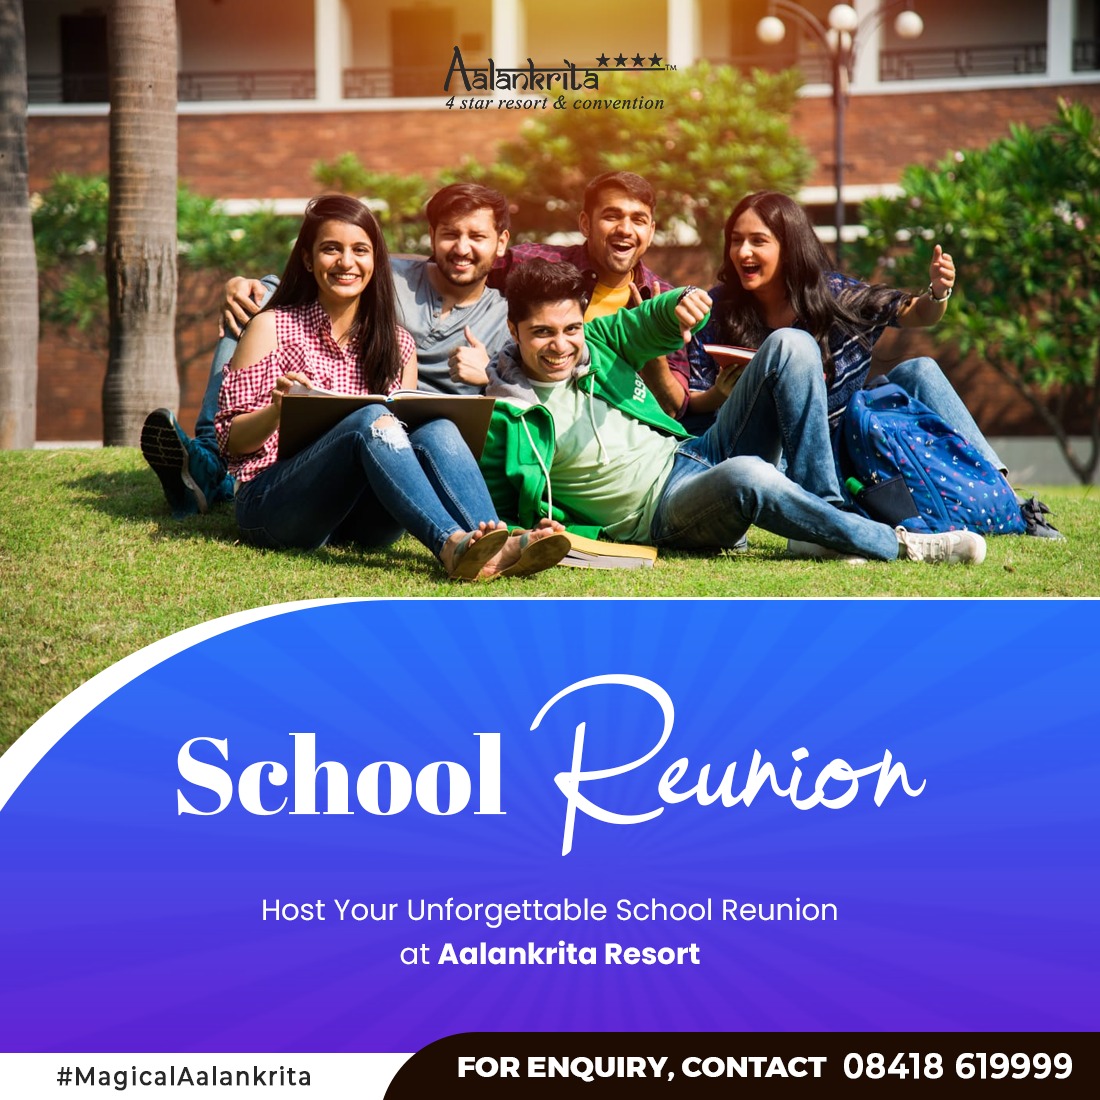 Are you ready to turn your school reunion dreams into reality? Reconnect with old friends, reminisce about your favorite school memories, & create new ones to cherish for years to come, midst the serene ambiance of Aalankrita Resort!#SchoolReunion #NatureLovers #MemoriesMadeHere